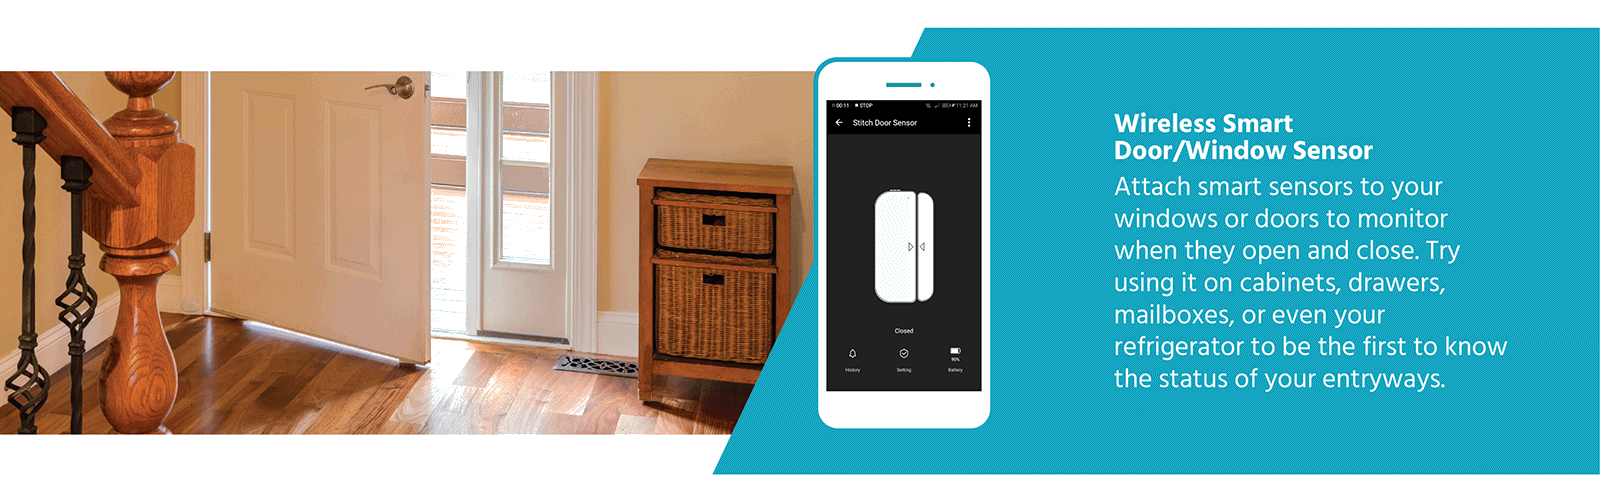 Wireless Smart Door/ Window sensor. Attach smart sensors to your windows or doors to monitor when they open and close. Try using it on cabinets, drawers, mailboxes, or even your refrigerator to be the first to know the status of your entryways.